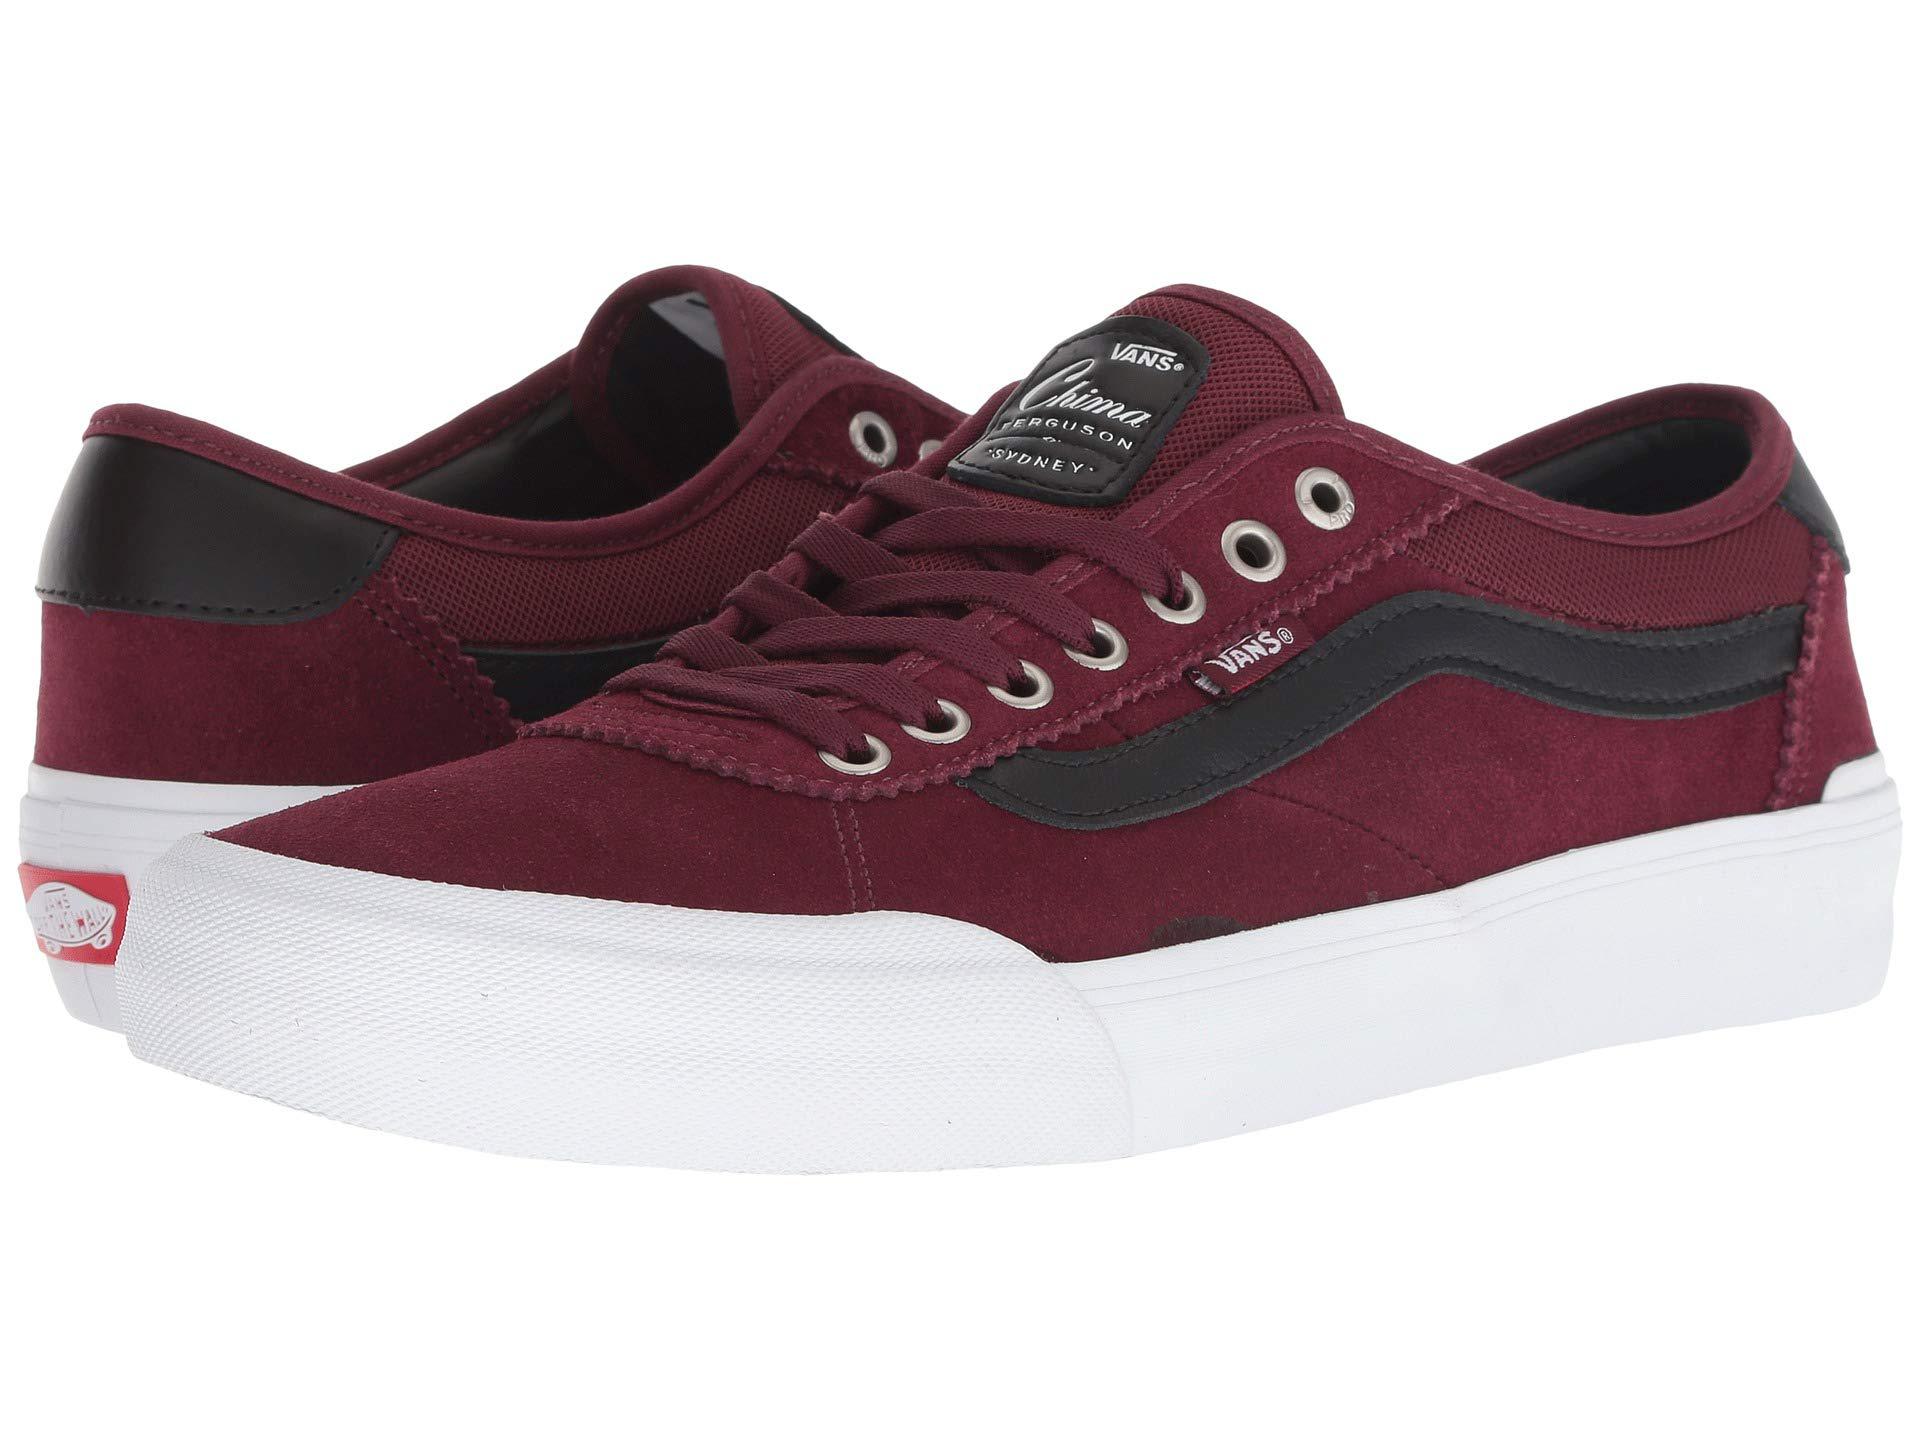 Vans Canvas Chima Pro 2 in Red - Lyst